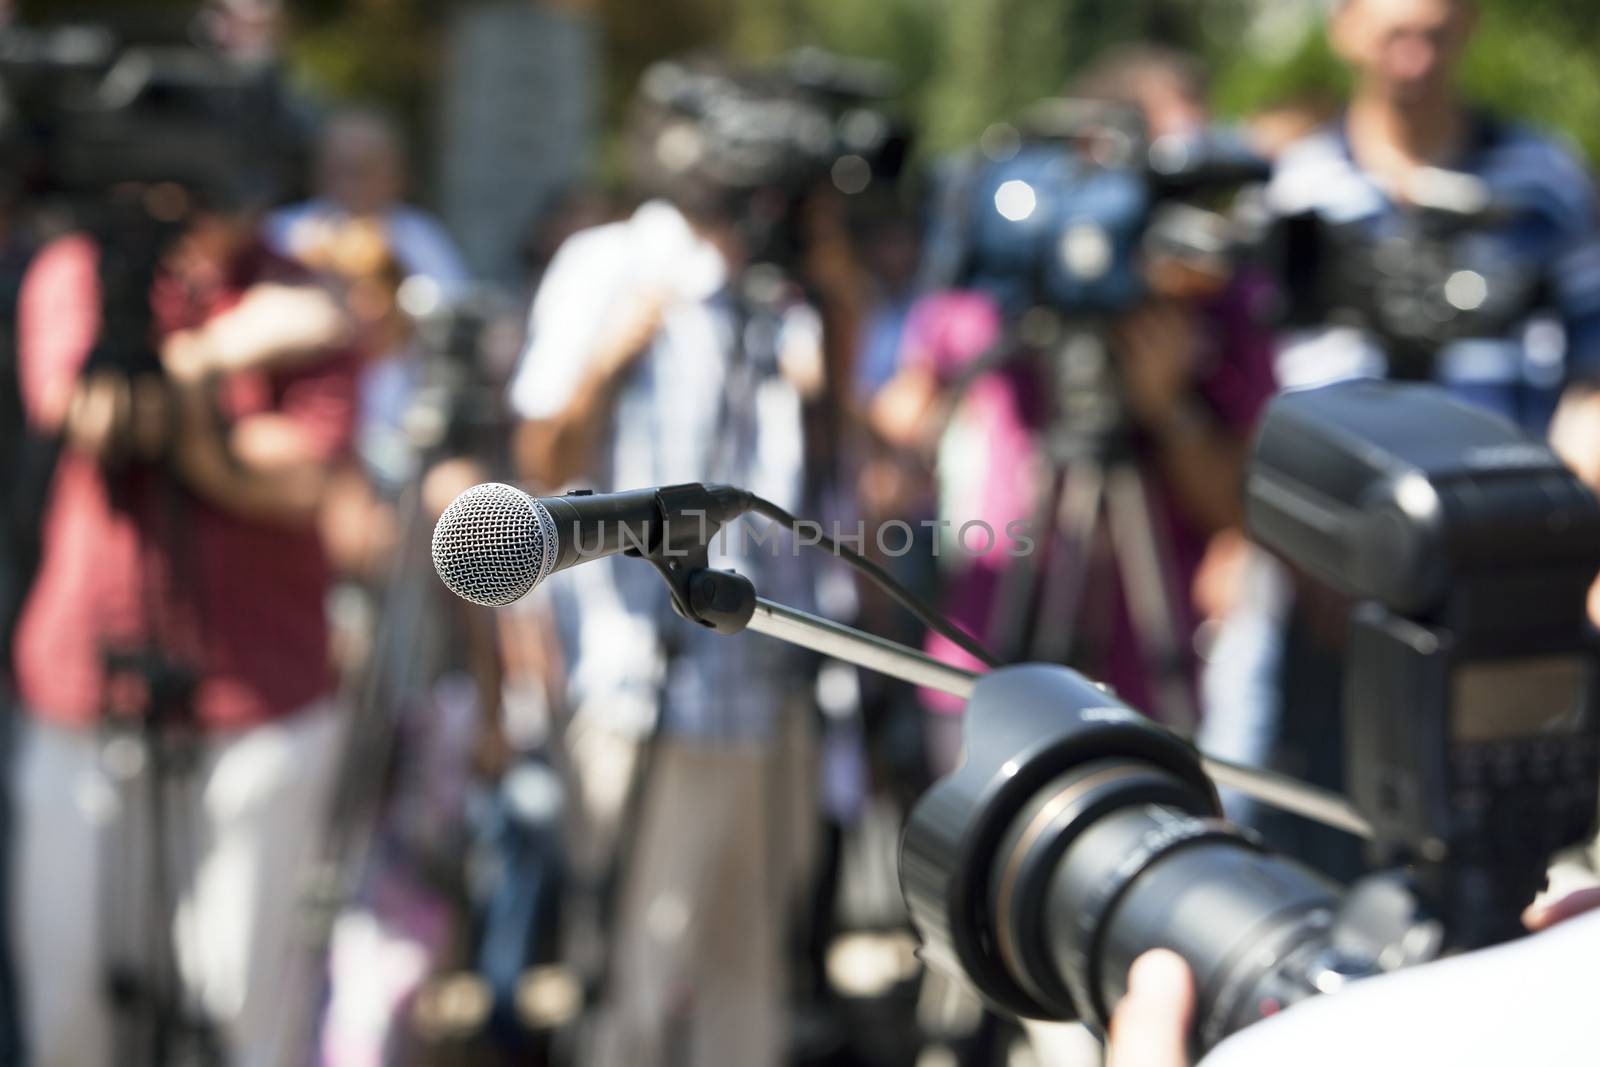 News conference by wellphoto